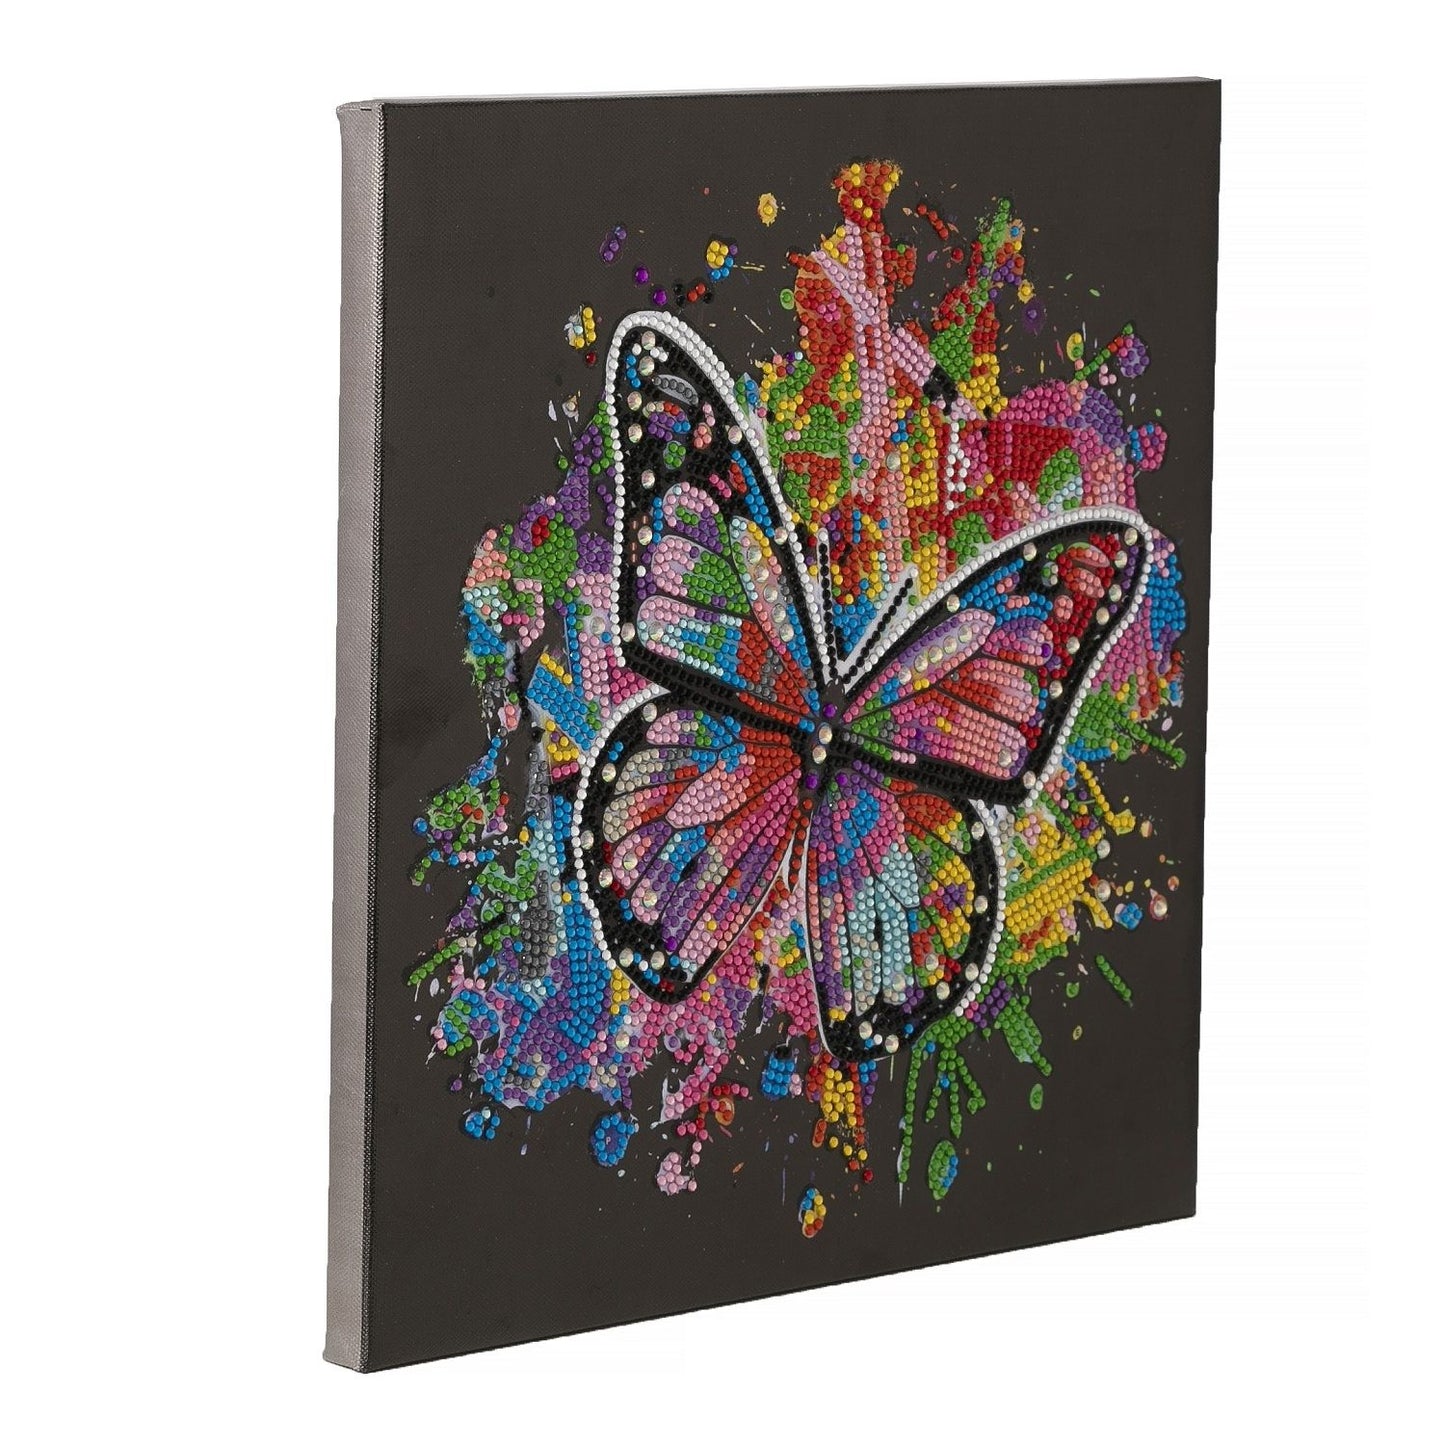 Colour In Flight - Craft Buddy 30cm x 30cm Mounted Crystal Art Kit - Partial Crystal Kit